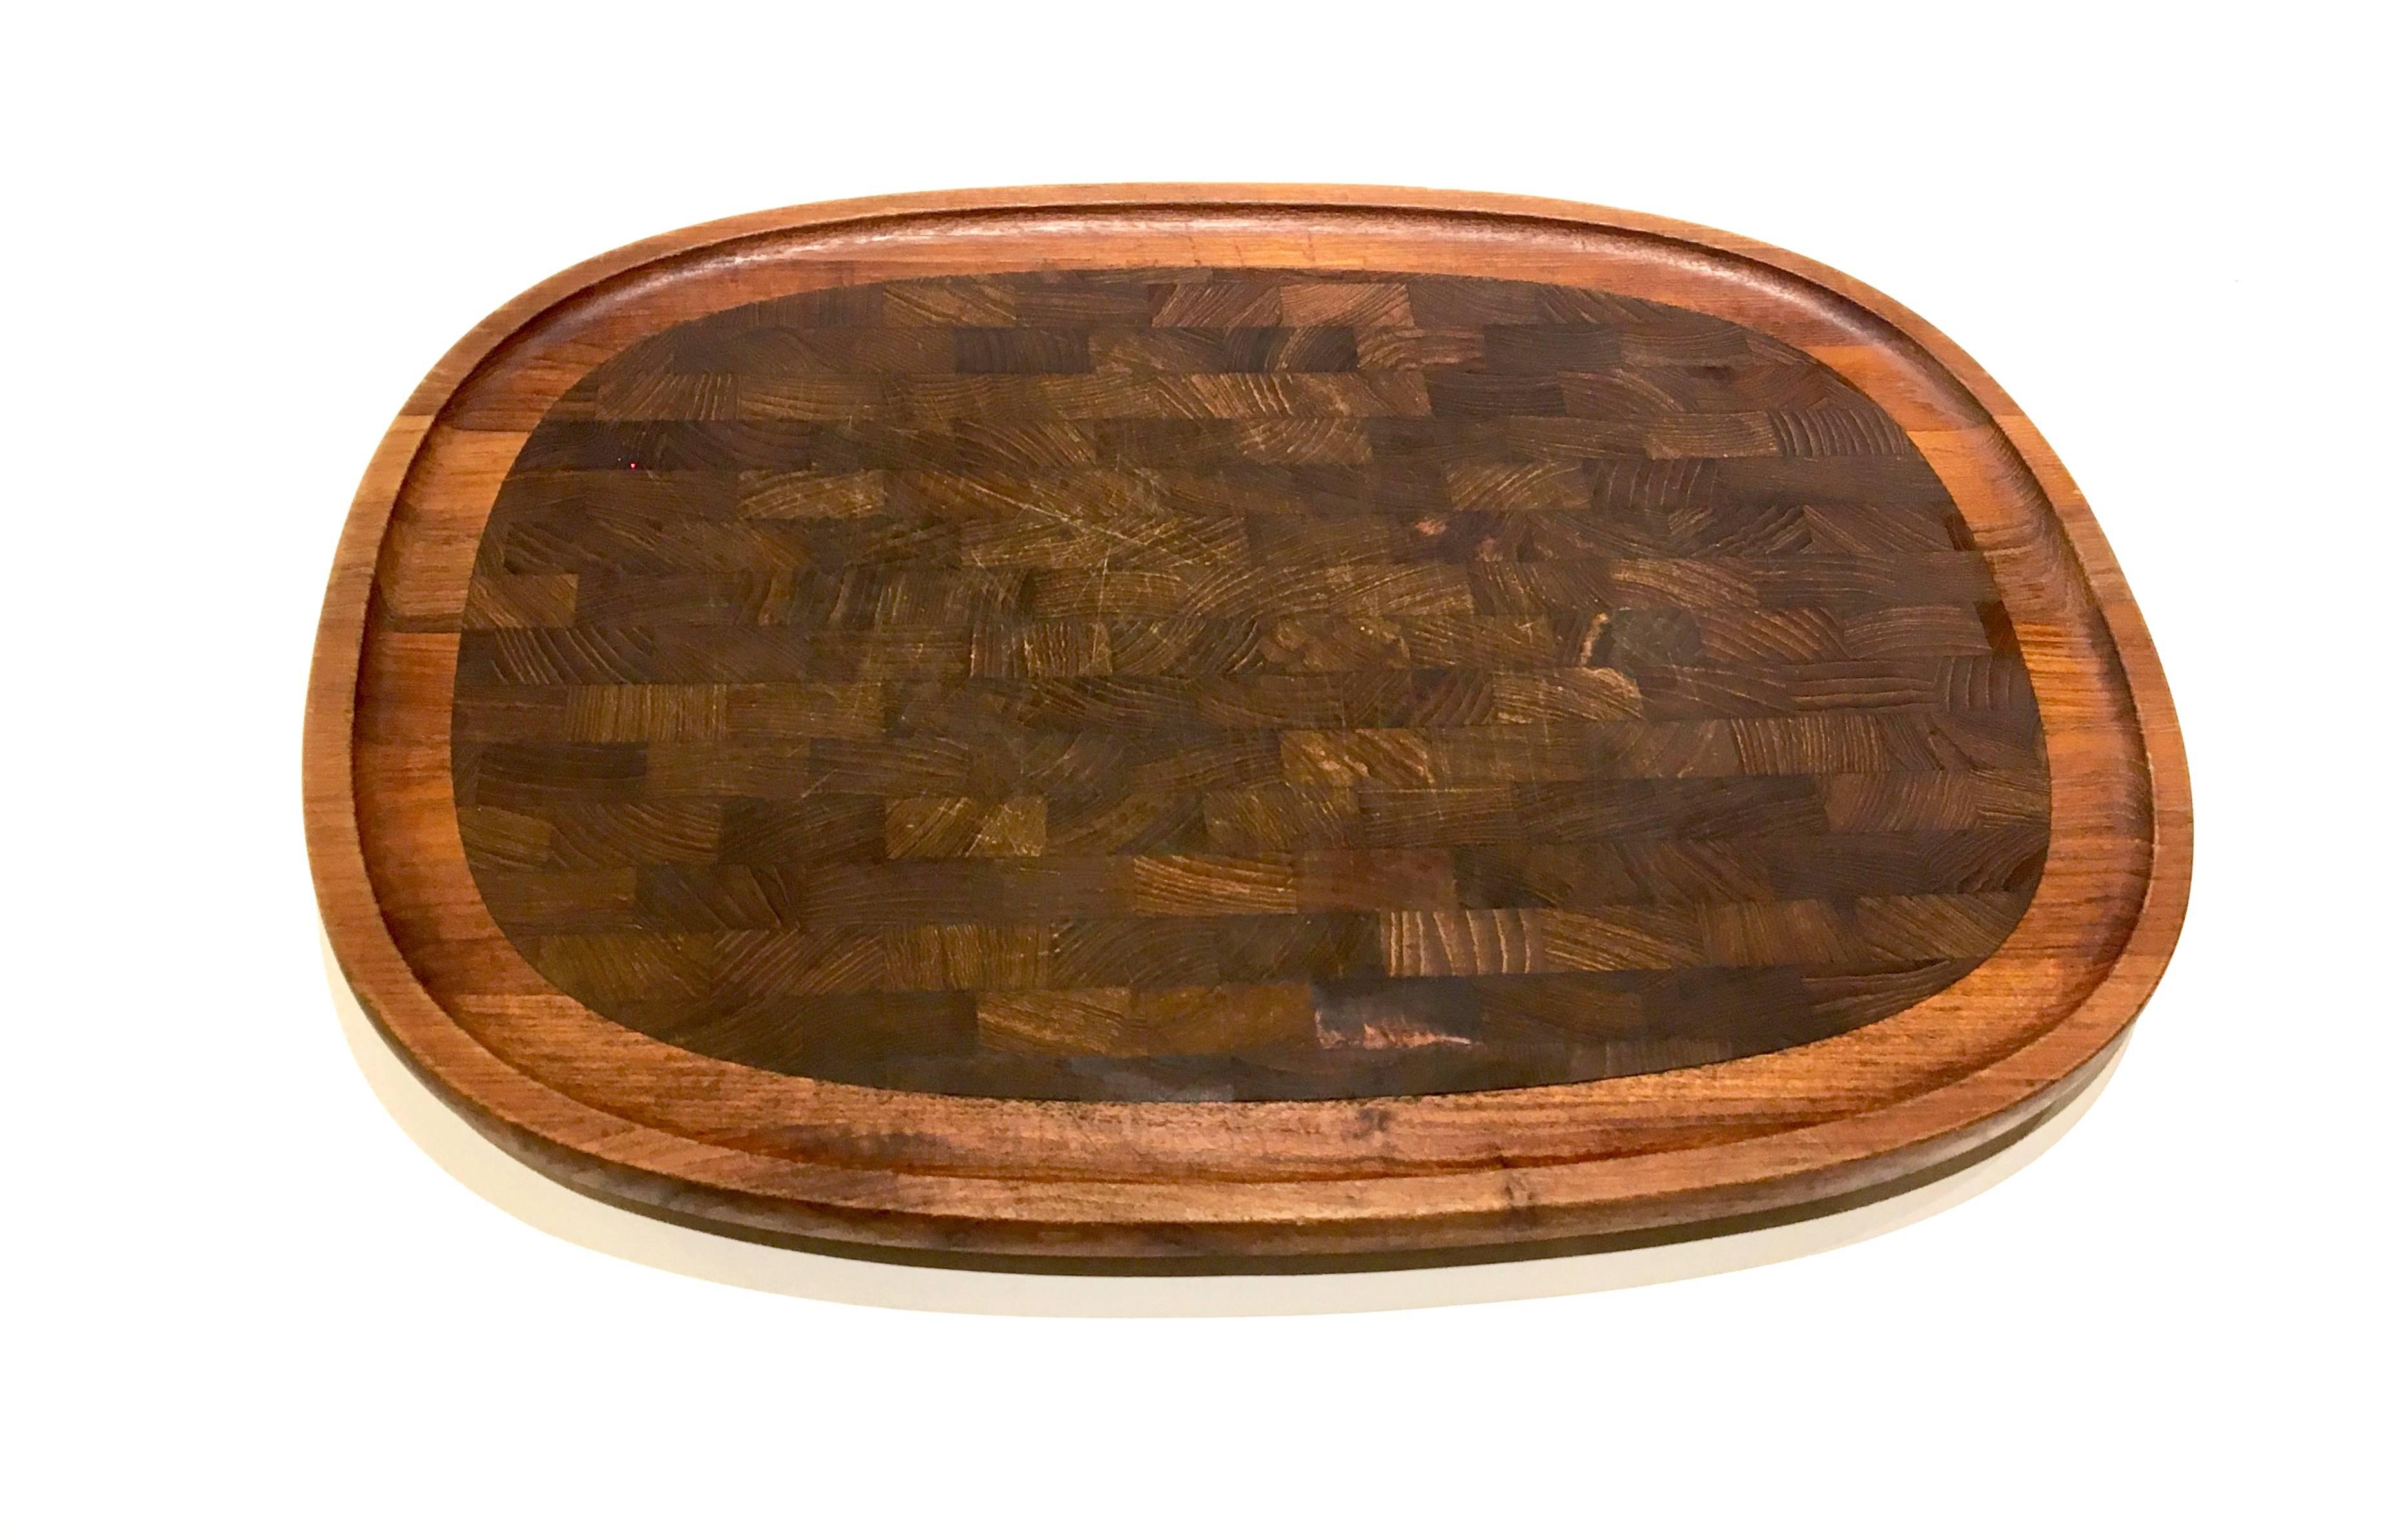 Beautiful large solid teak tray designed by Quistgaard for Dansk, circa 1950s freshly refinish.